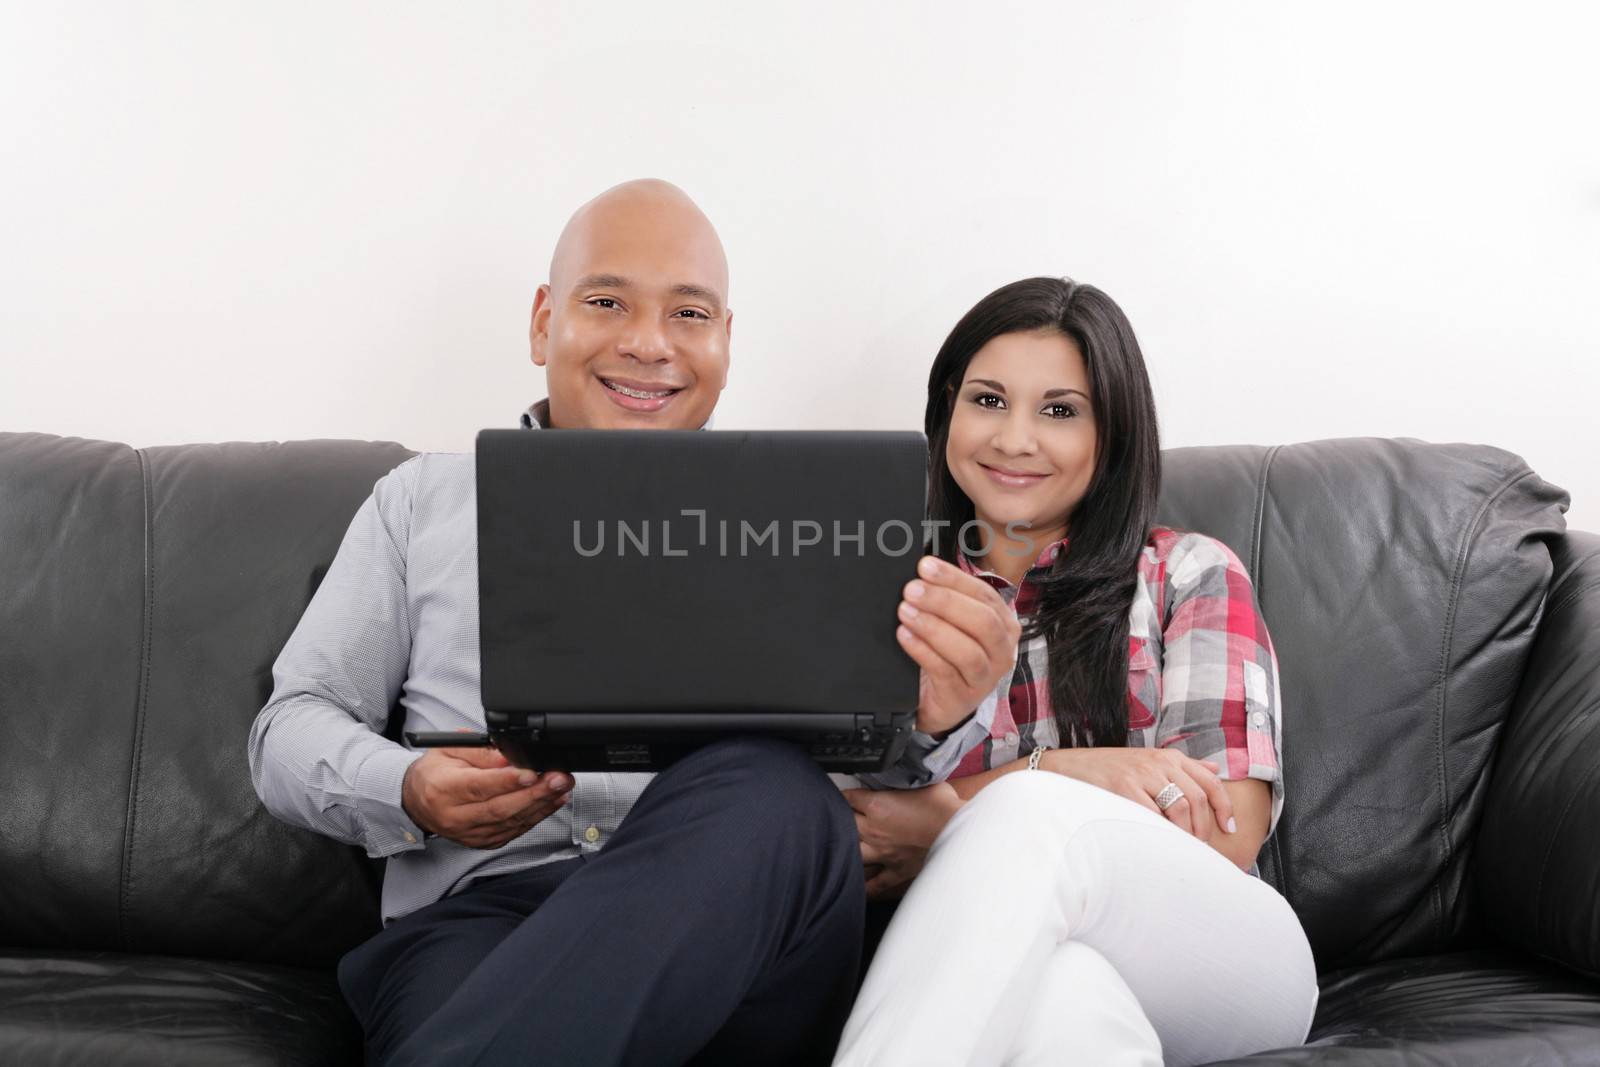 Hispanic Couple on Black Couch with Computer